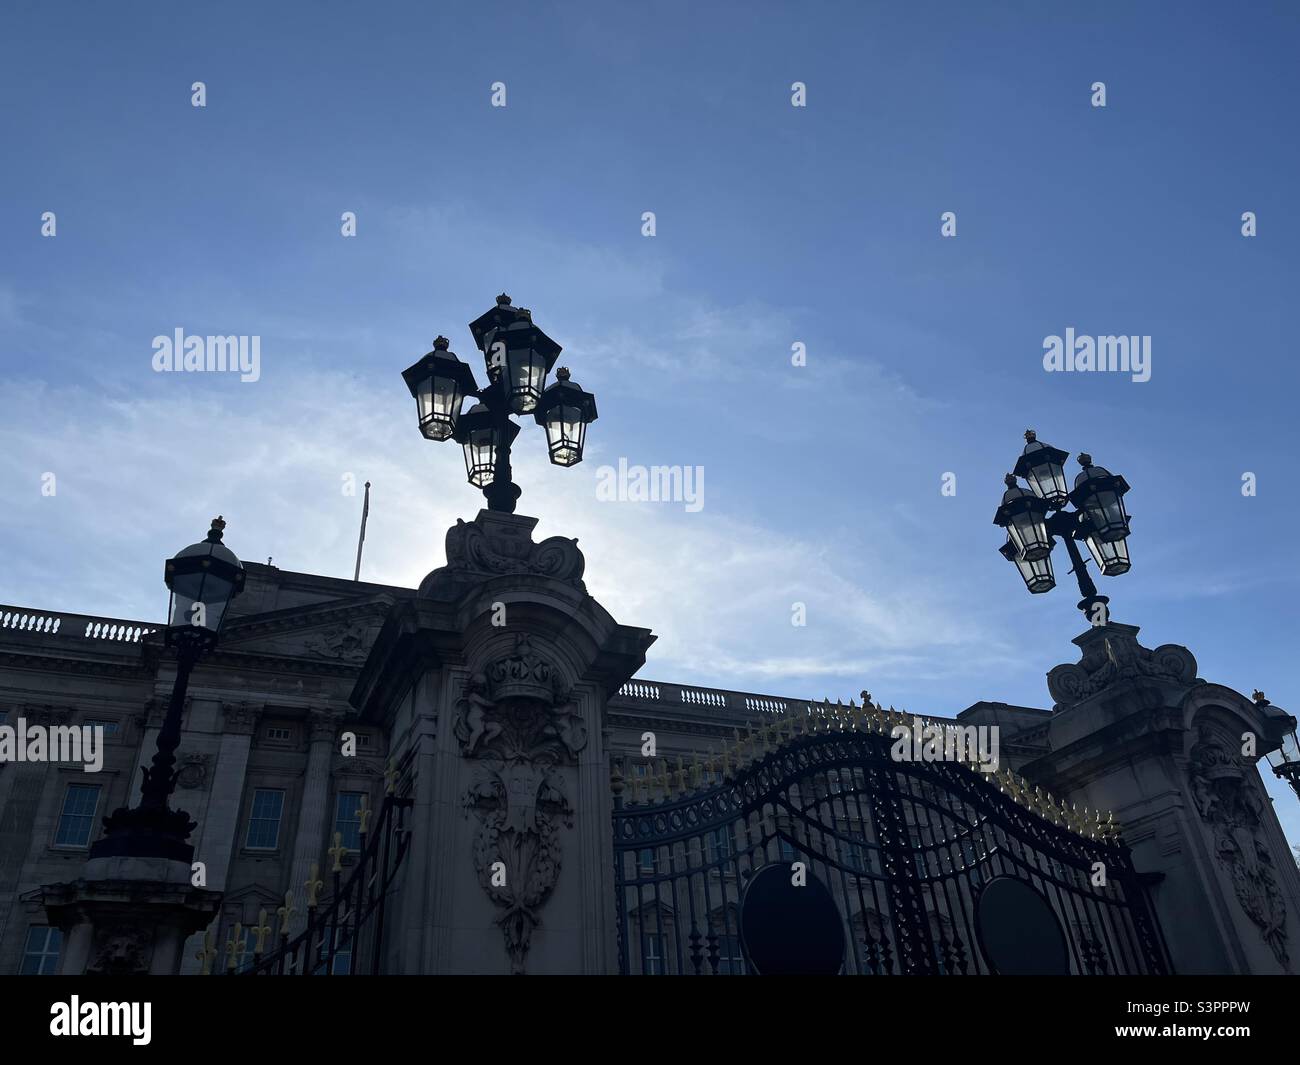 Siluotte of lamps and gates outside Buckingham Palace in London Stock Photo